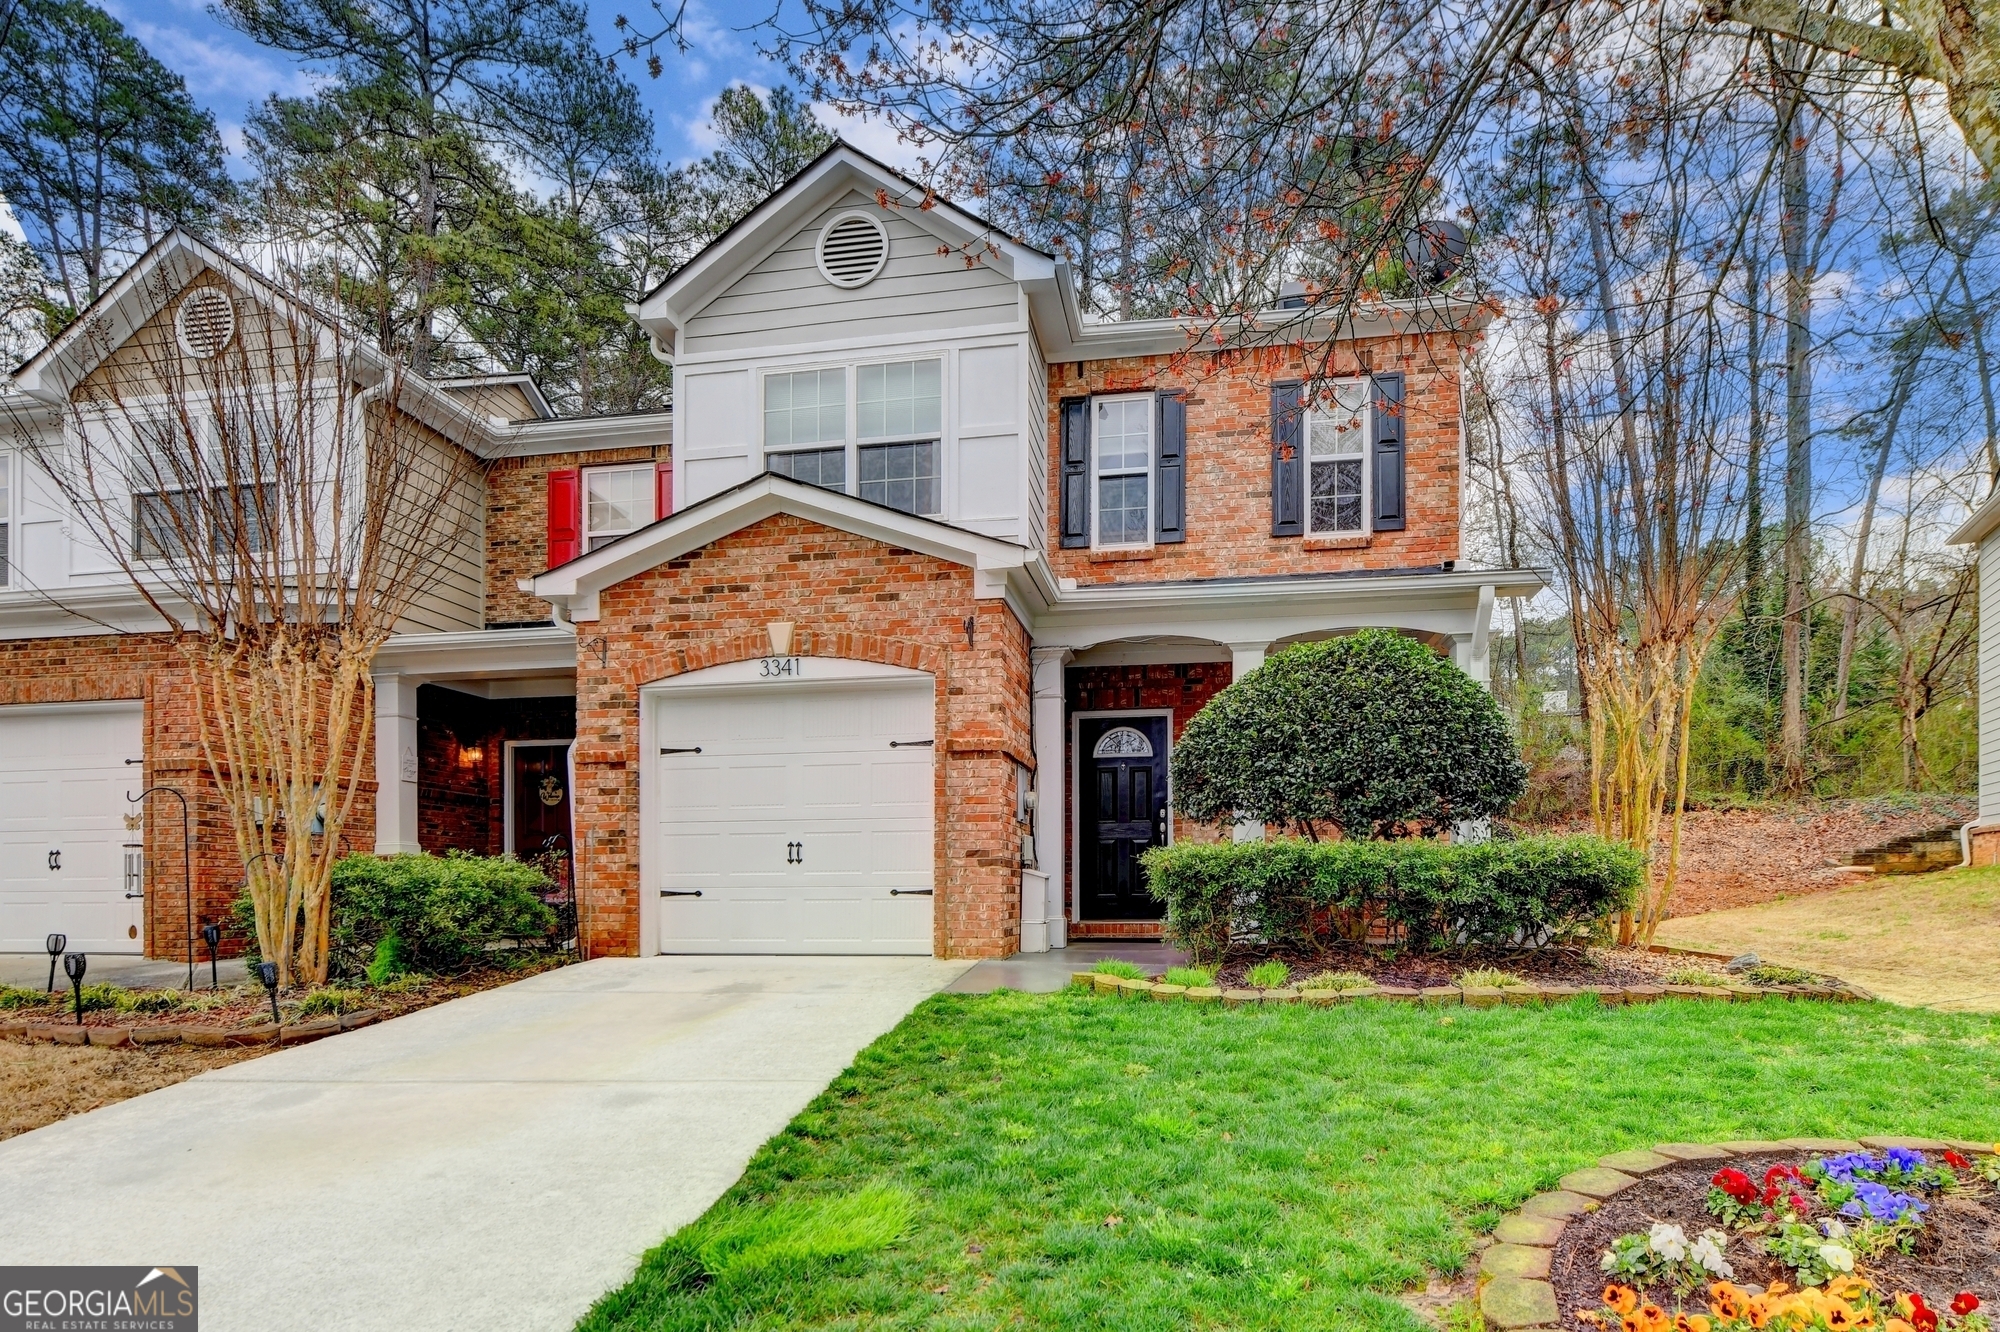 View Lawrenceville, GA 30044 townhome